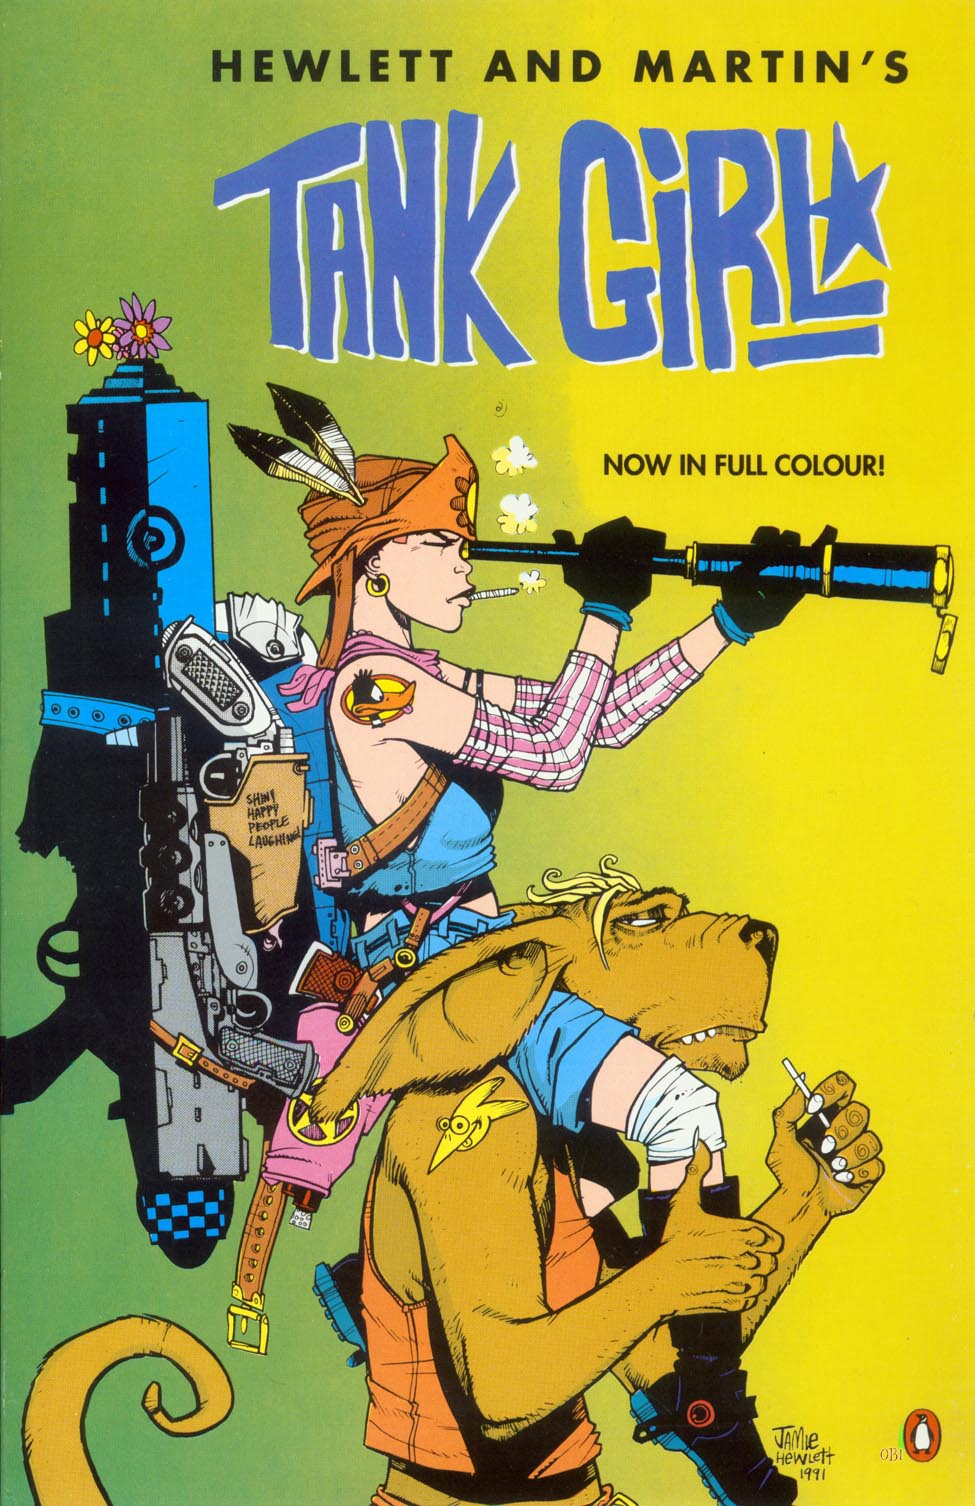 Read online Hewlett and Martin's Tank Girl comic -  Issue # TPB - 1